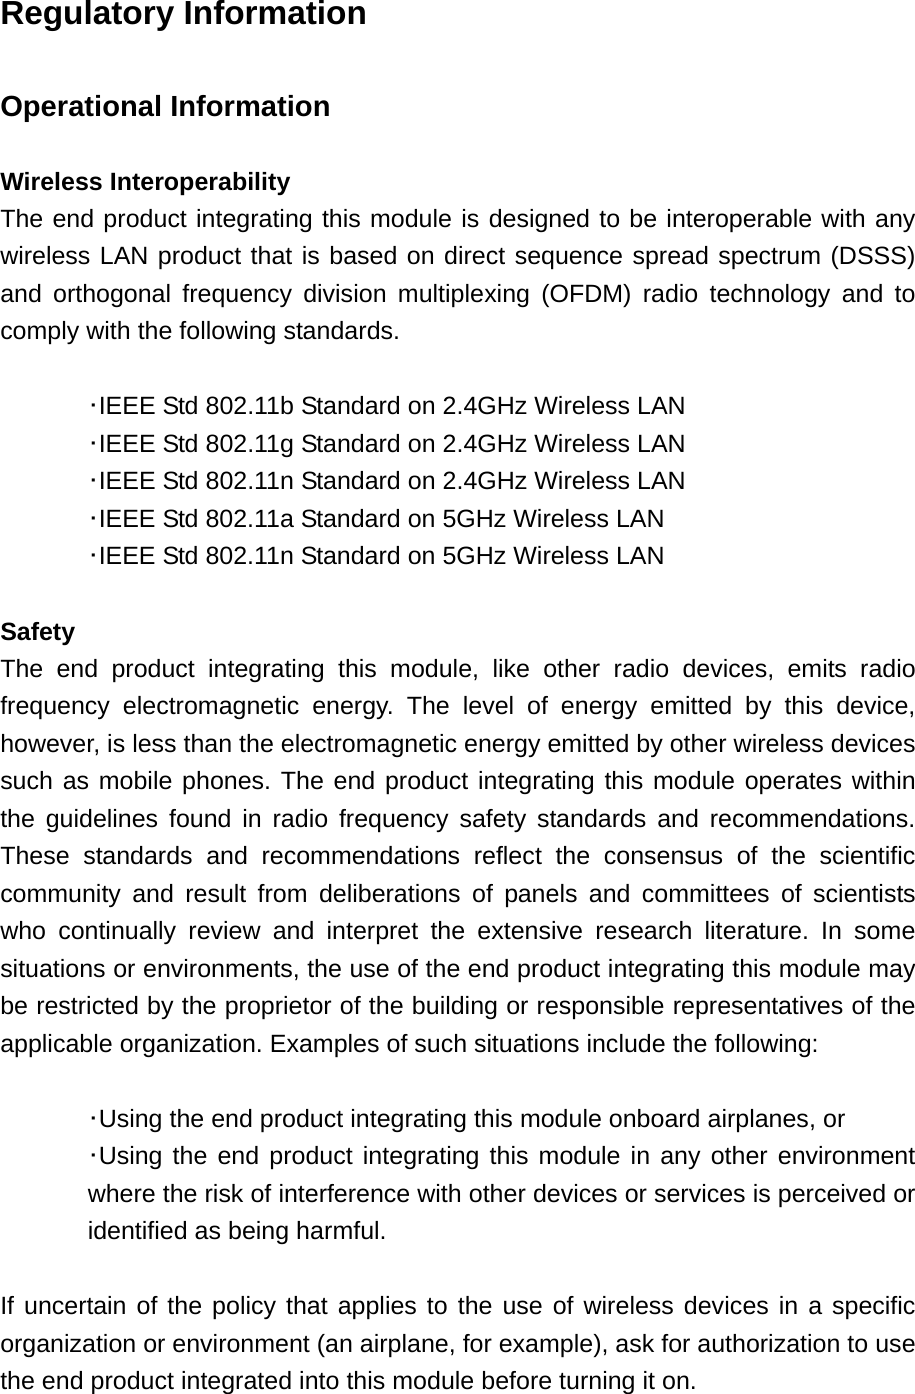 Regulatory Information  Operational Information  Wireless Interoperability The end product integrating this module is designed to be interoperable with any wireless LAN product that is based on direct sequence spread spectrum (DSSS) and orthogonal frequency division multiplexing (OFDM) radio technology and to comply with the following standards.   ･IEEE Std 802.11b Standard on 2.4GHz Wireless LAN  ･IEEE Std 802.11g Standard on 2.4GHz Wireless LAN  ･IEEE Std 802.11n Standard on 2.4GHz Wireless LAN  ･IEEE Std 802.11a Standard on 5GHz Wireless LAN  ･IEEE Std 802.11n Standard on 5GHz Wireless LAN  Safety The end product integrating this module, like other radio devices, emits radio frequency electromagnetic energy. The level of energy emitted by this device, however, is less than the electromagnetic energy emitted by other wireless devices such as mobile phones. The end product integrating this module operates within the guidelines found in radio frequency safety standards and recommendations. These standards and recommendations reflect the consensus of the scientific community and result from deliberations of panels and committees of scientists who continually review and interpret the extensive research literature. In some situations or environments, the use of the end product integrating this module may be restricted by the proprietor of the building or responsible representatives of the applicable organization. Examples of such situations include the following:   ･Using the end product integrating this module onboard airplanes, or ･Using the end product integrating this module in any other environment where the risk of interference with other devices or services is perceived or identified as being harmful.  If uncertain of the policy that applies to the use of wireless devices in a specific organization or environment (an airplane, for example), ask for authorization to use the end product integrated into this module before turning it on. 